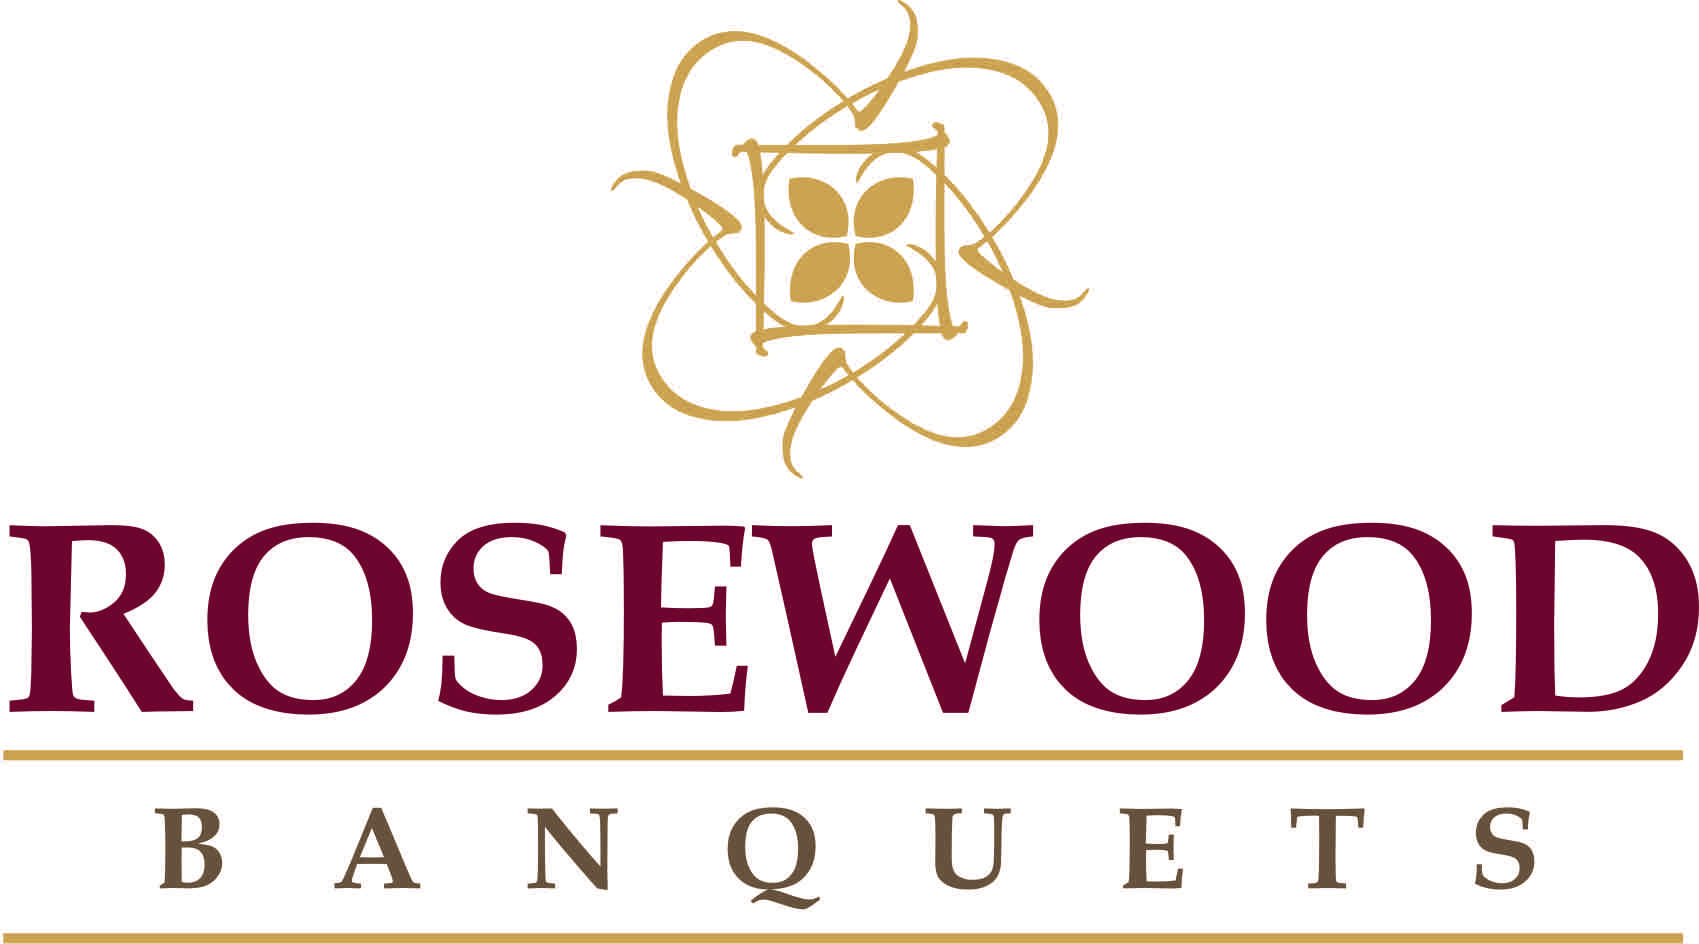 Rosewood Banquets|Catering Services|Event Services